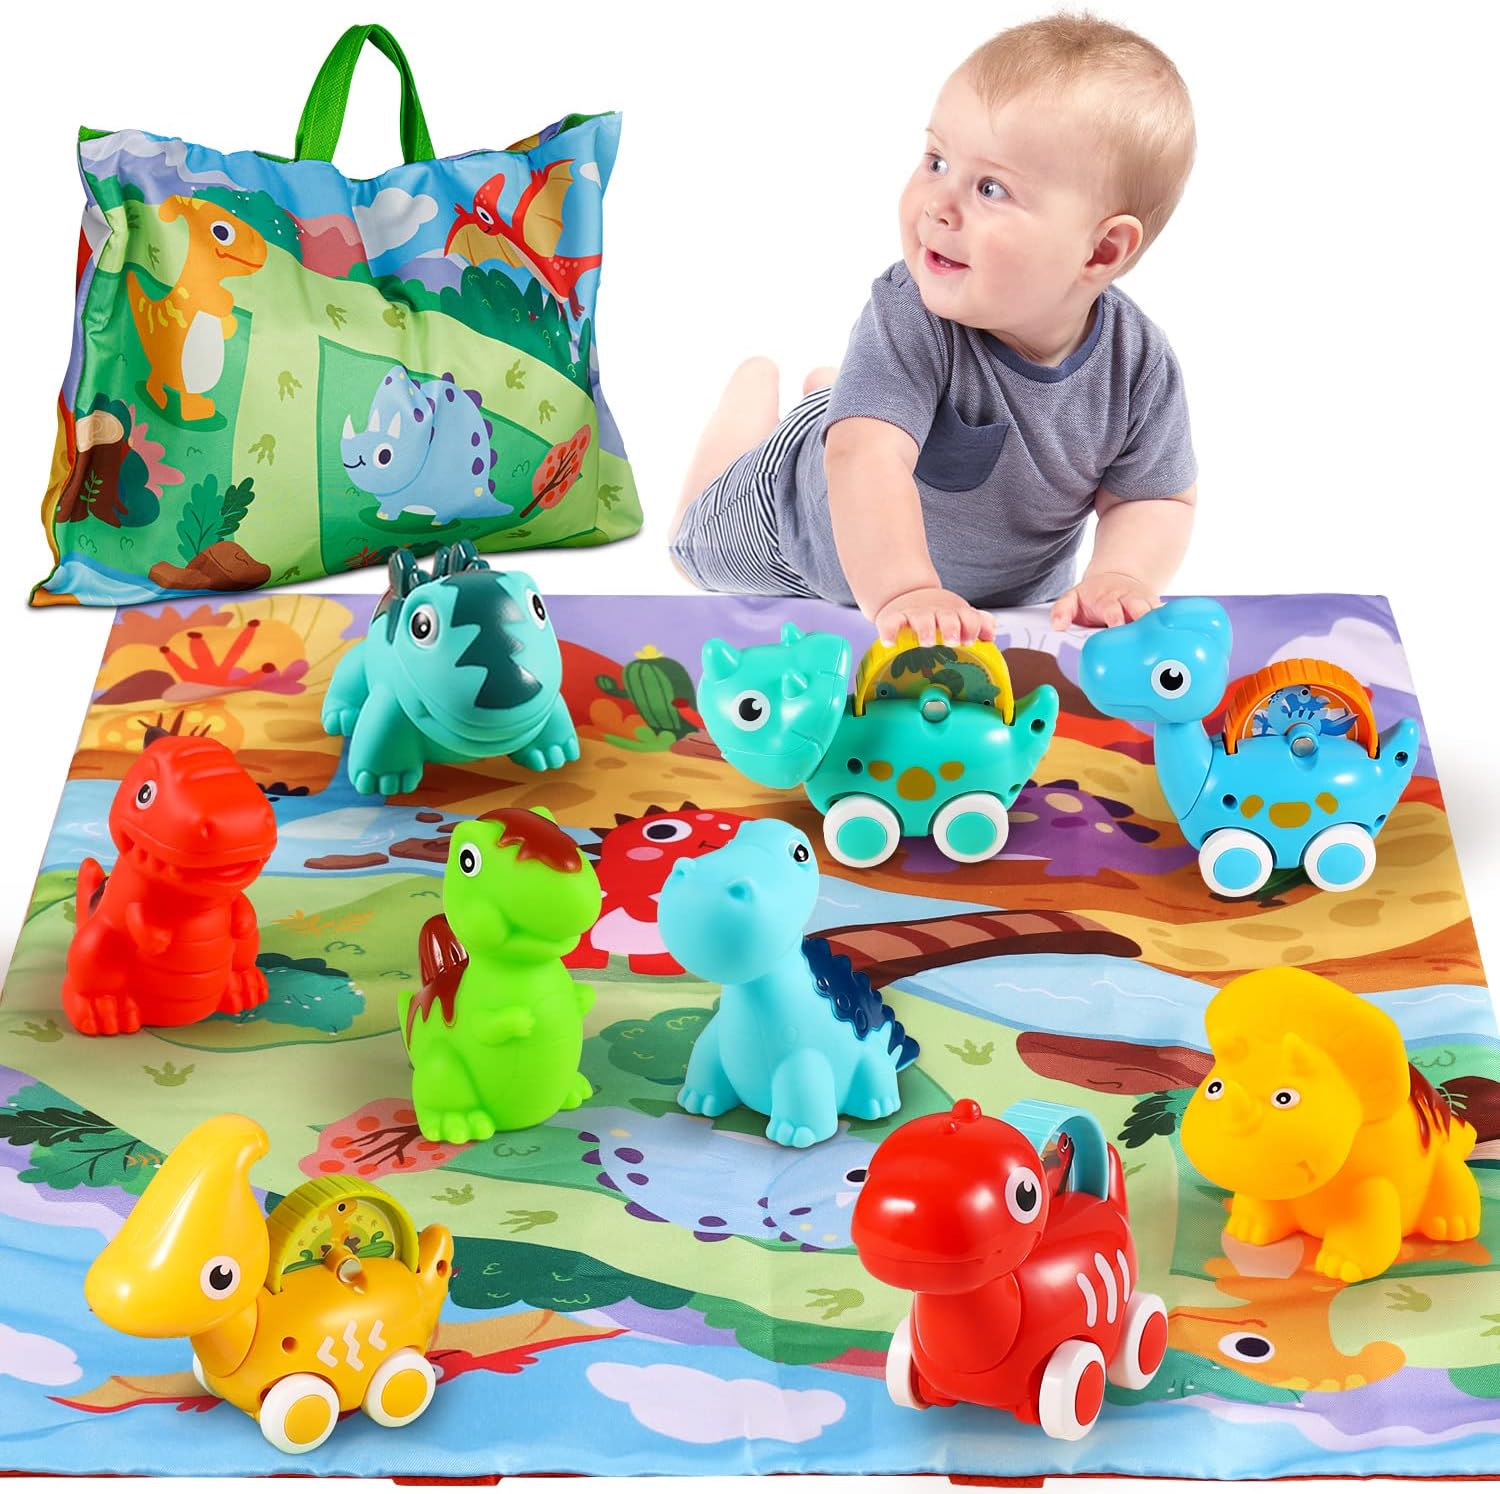 ALASOU 9 PCS Dinosaur Car Toys with Playmat/Storage Bag|1st Birthday Gifts for Toddler Toys Age 1-2|Baby Toys for 1 2 3 Year Old Boy|1 2 Year Old Boy Birthday Gift for Infant Toddlers